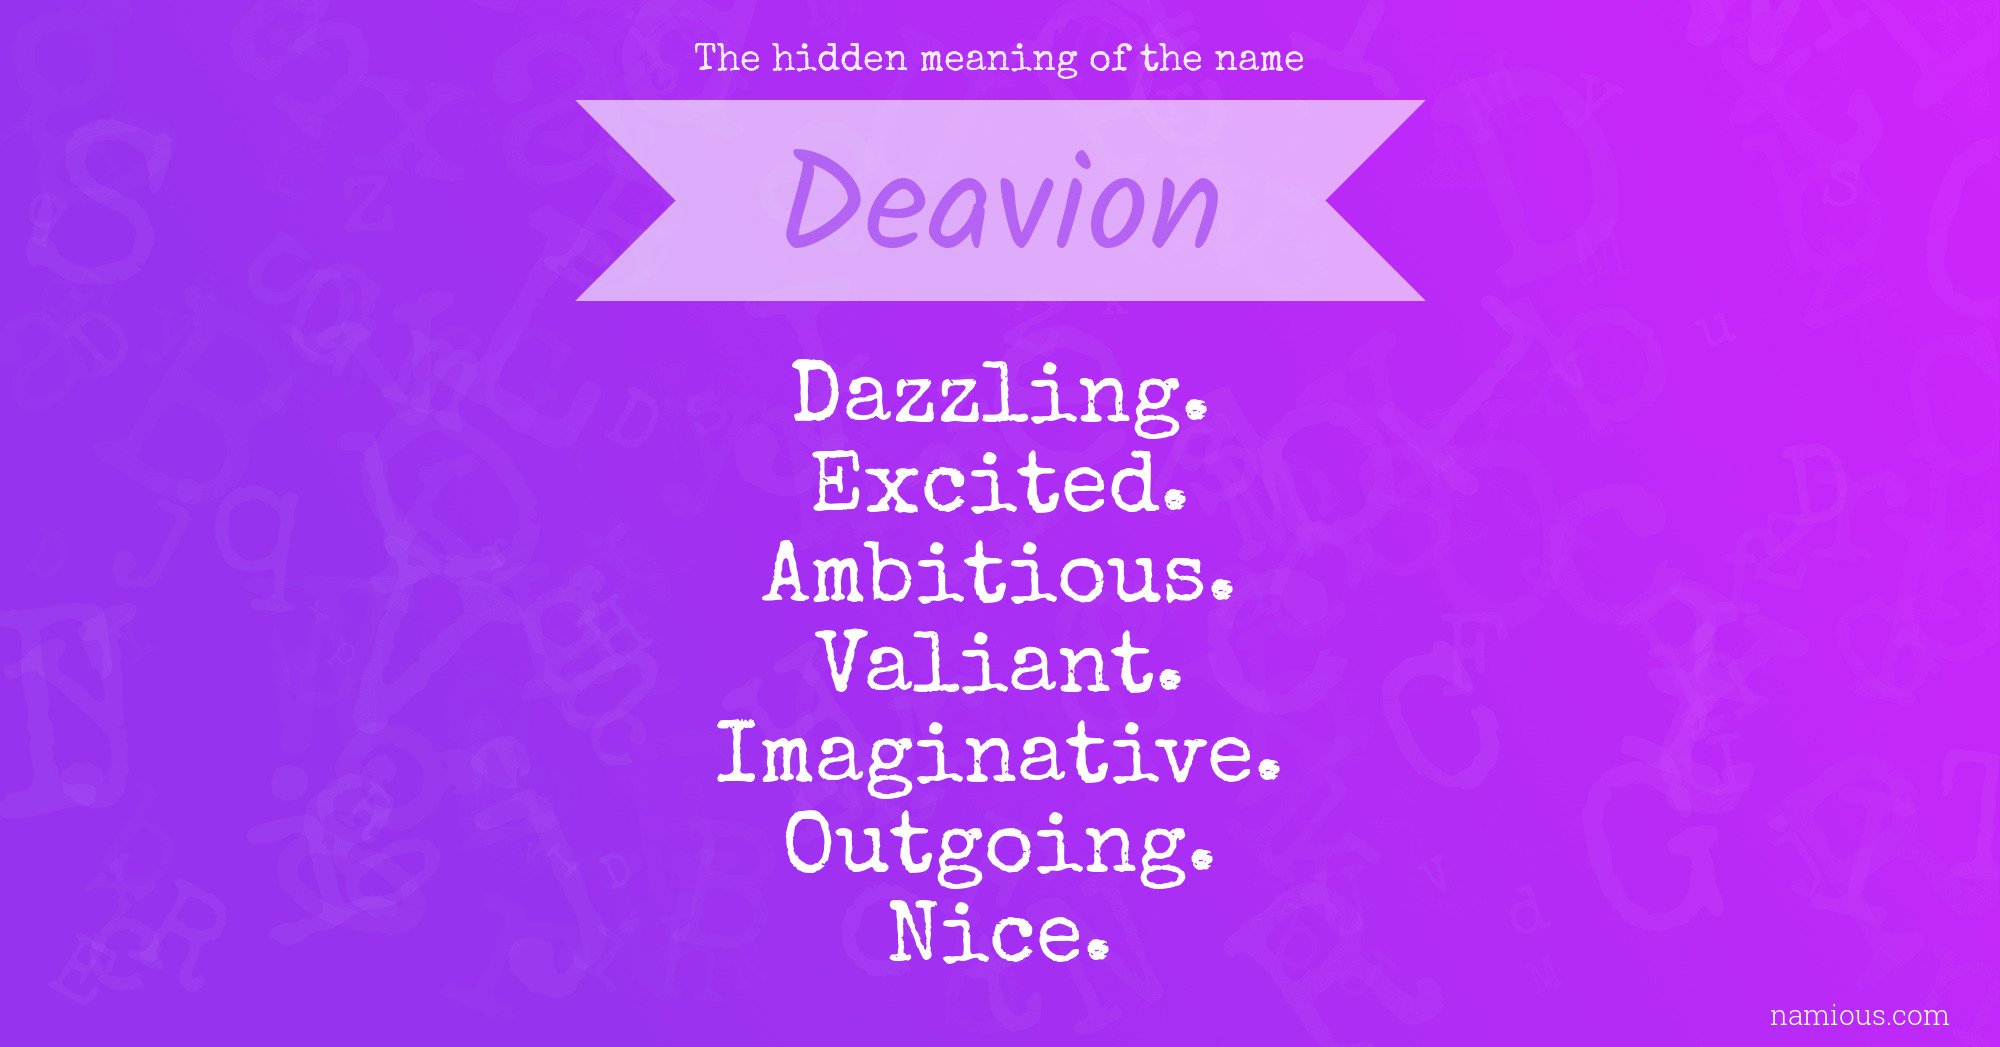 The hidden meaning of the name Deavion